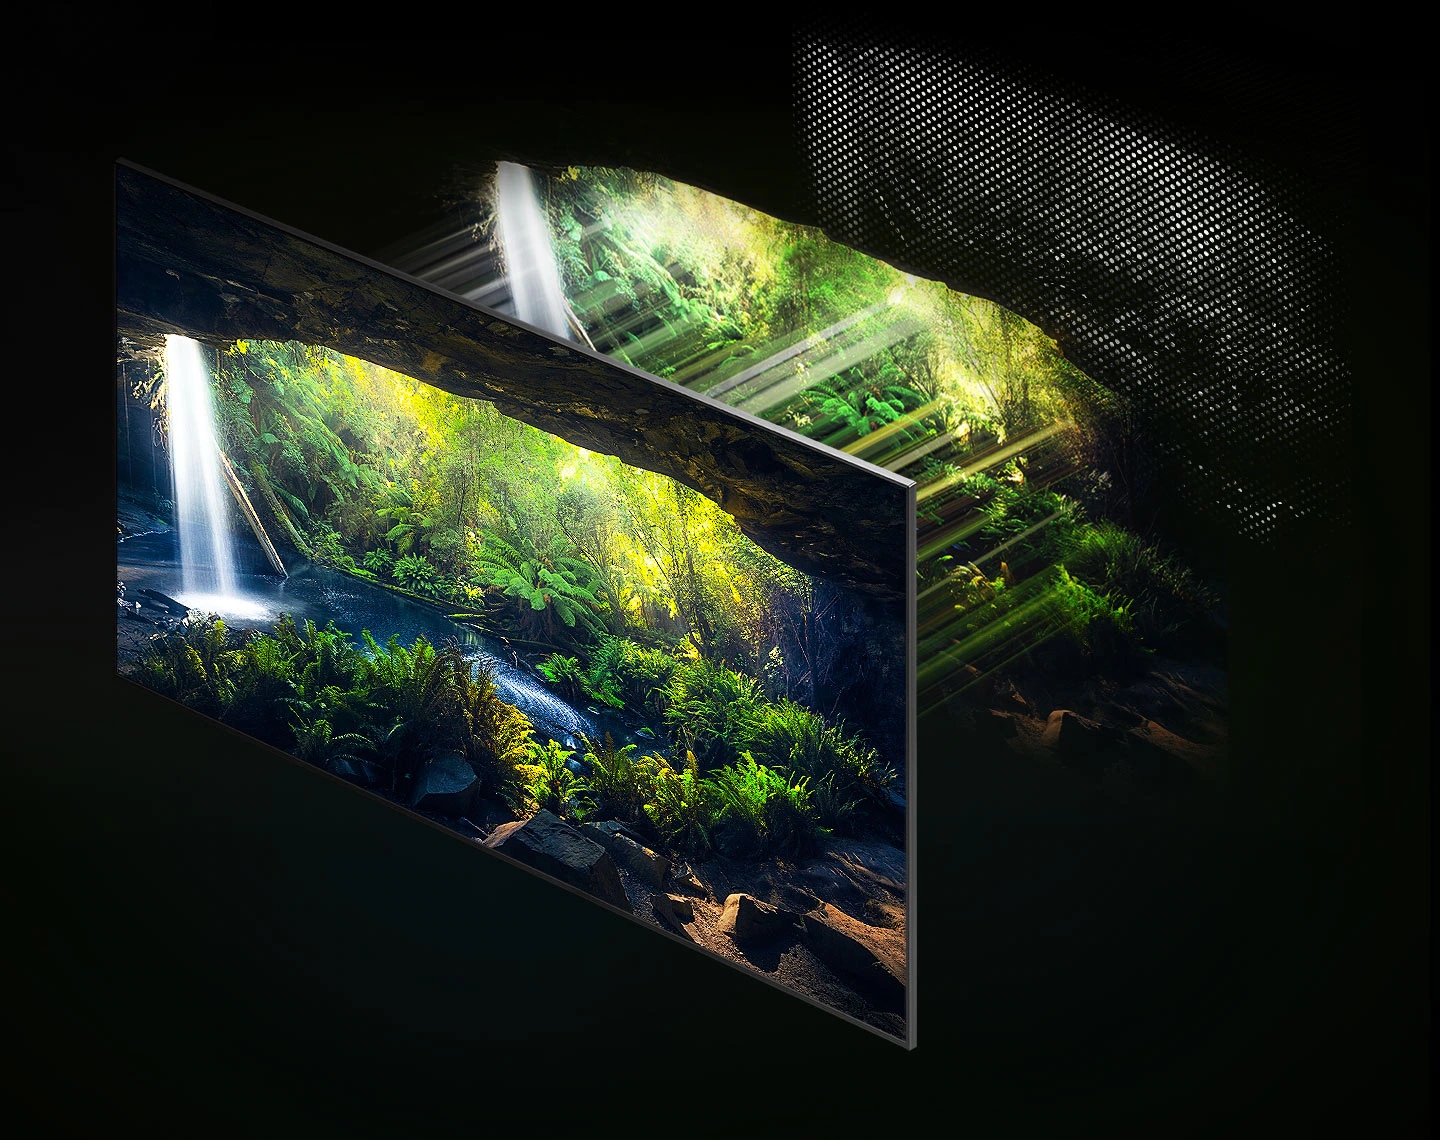 A QLED TV is divided into 3 layers to show grain-sized Quantum Mini LEDs that enhance sharpness and color volume of a forest-like environment on the screen via Quantum Matrix Technology Pro.